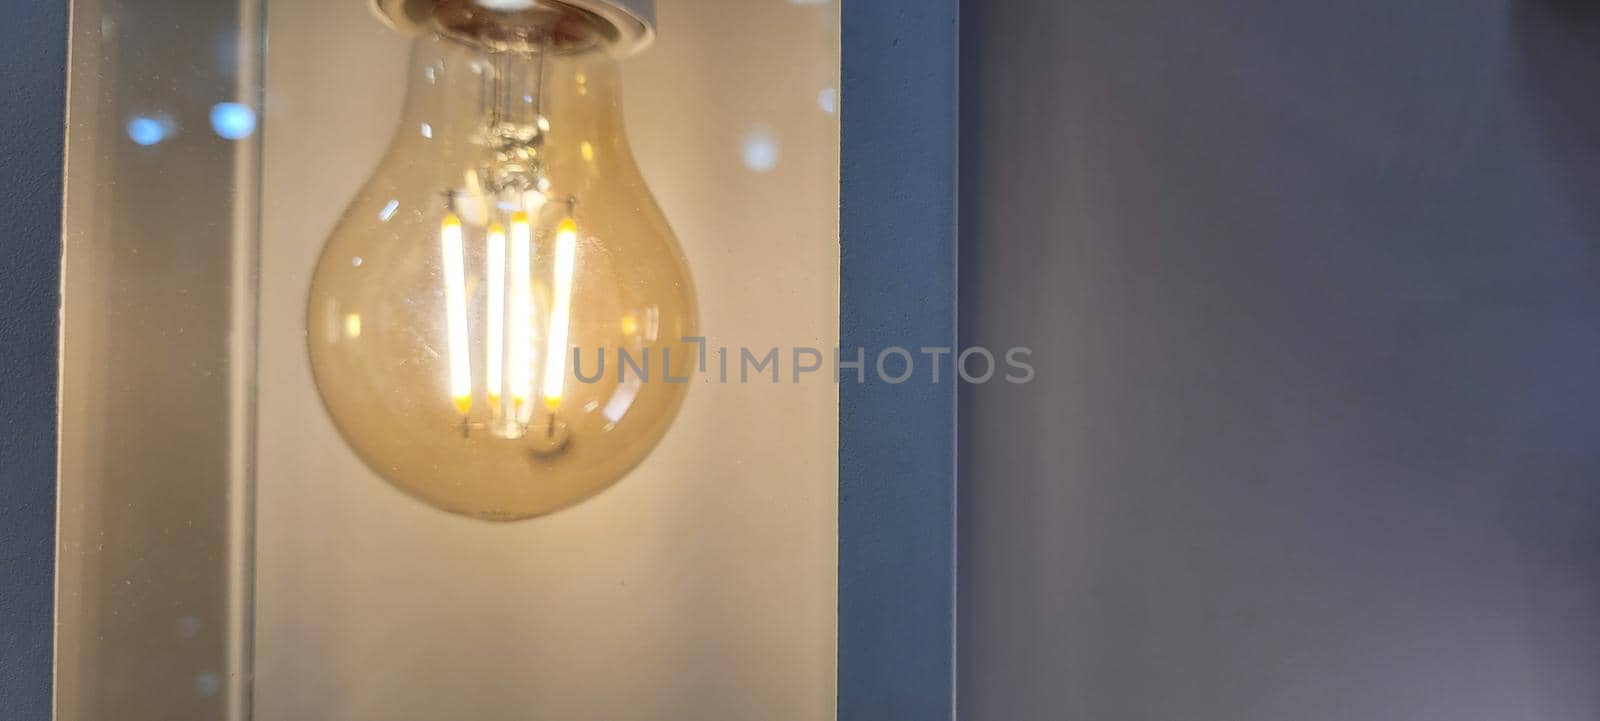 filament lighting with warm colors that can be used as a shadow background